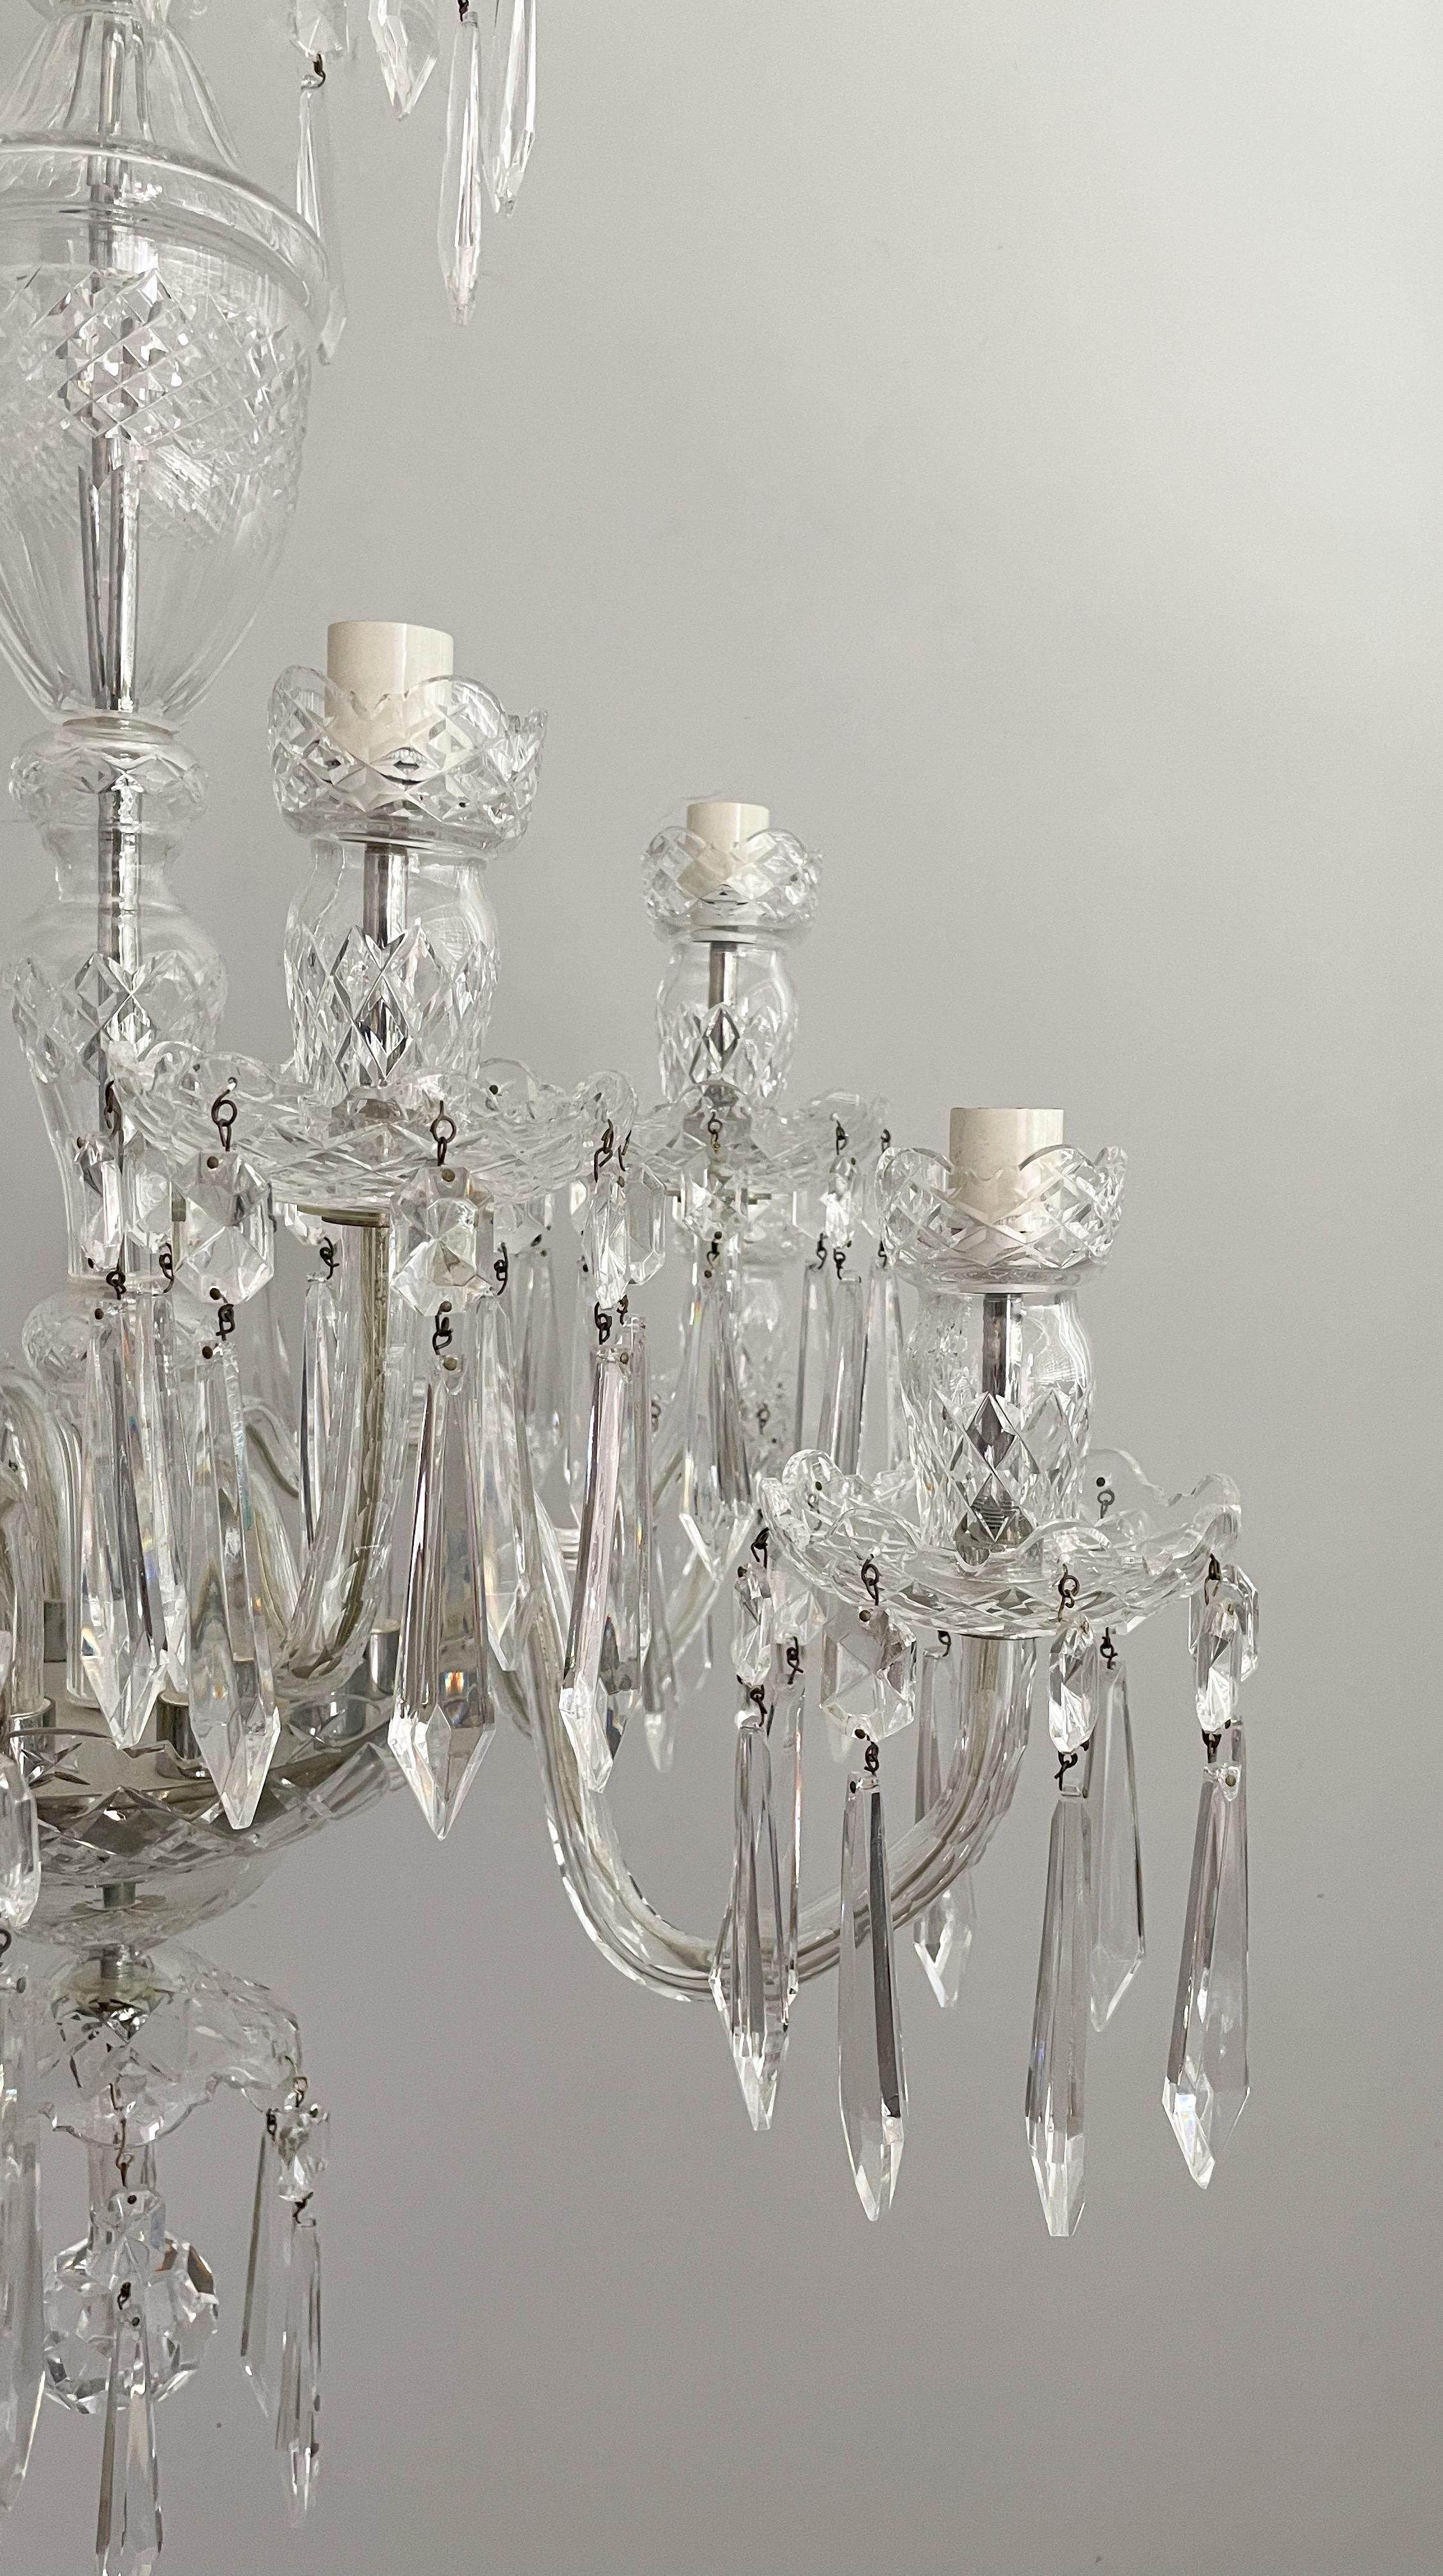 Exquisite, vintage Waterford Crystal 10 light “Avoca” chandelier. 

The chandelier features beautiful cut crystal details throughout this two tier design. The “Avoca” light fixtures are some of the most sought after designs from the now